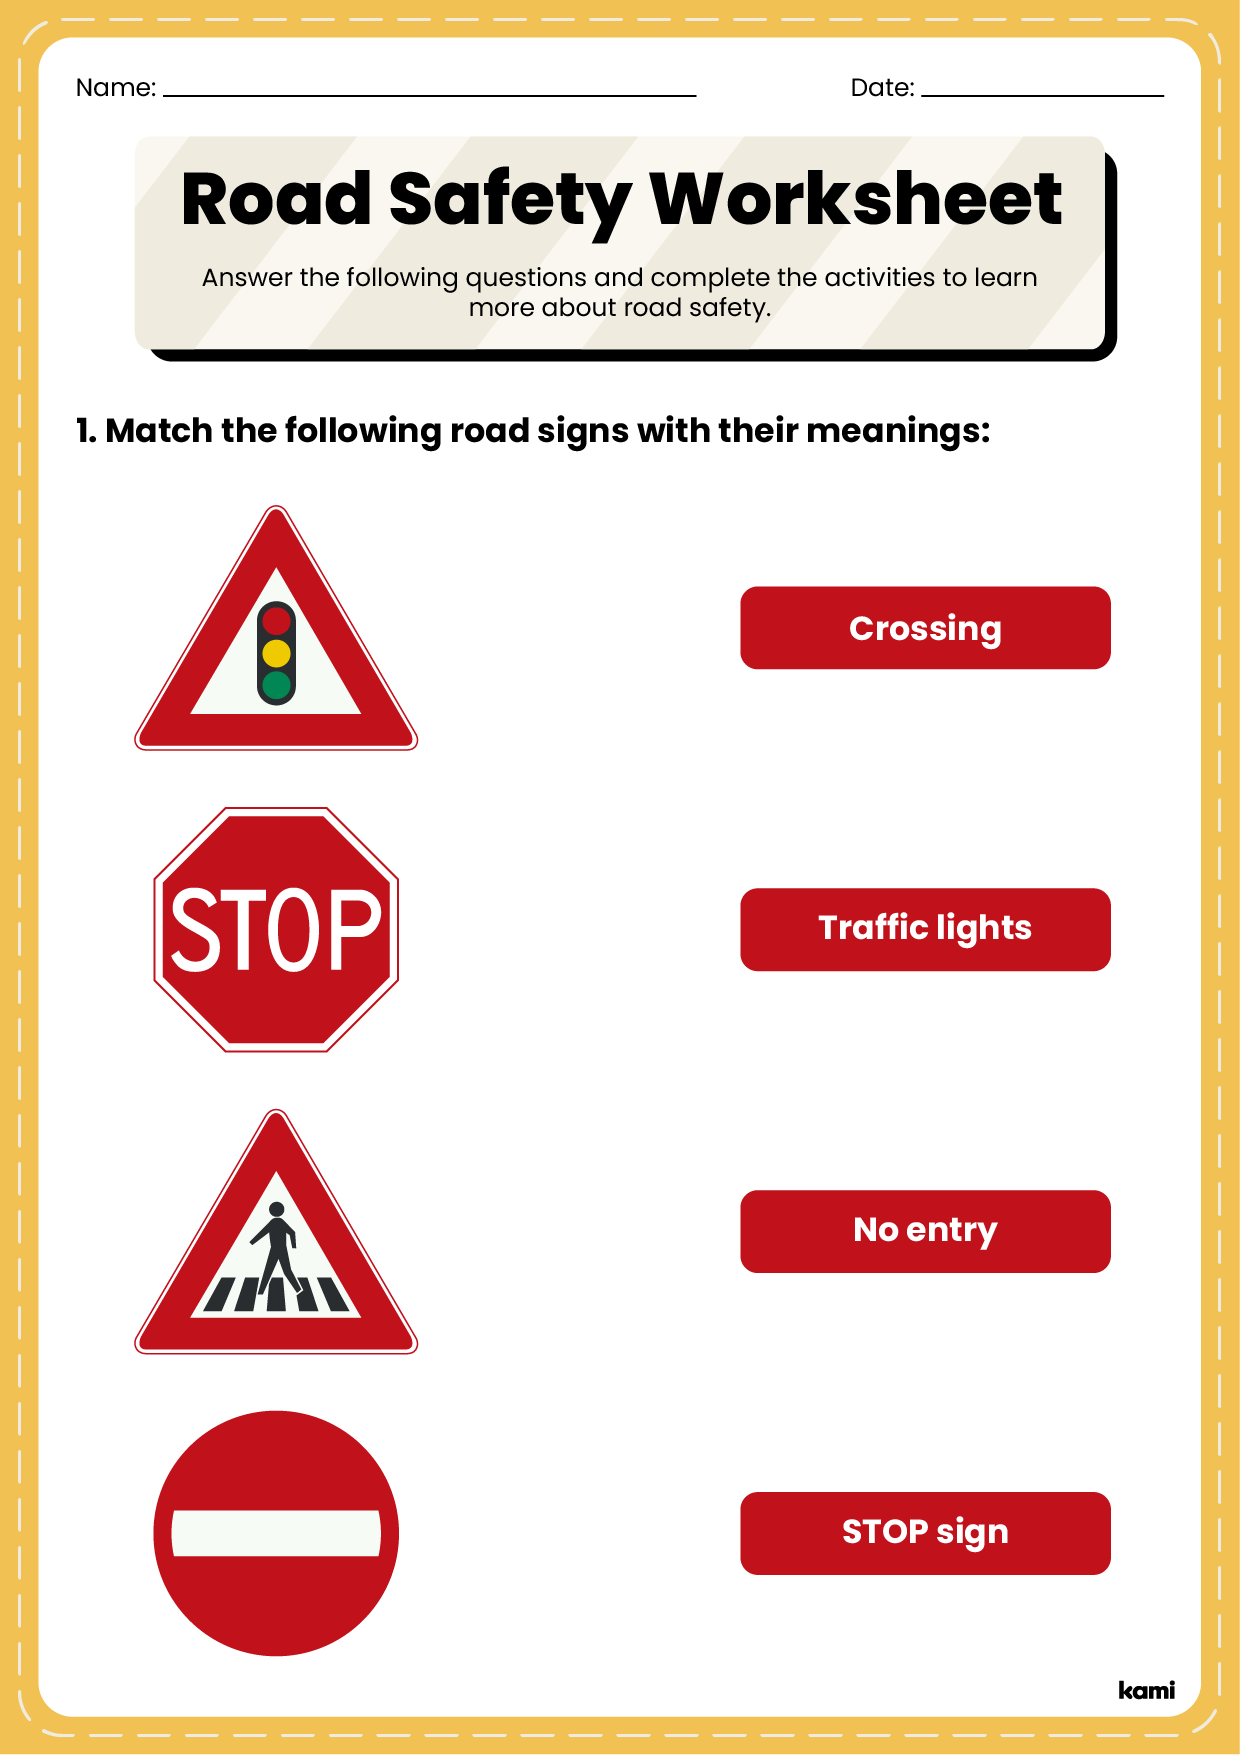 A worksheet for road safety with a exercises design.